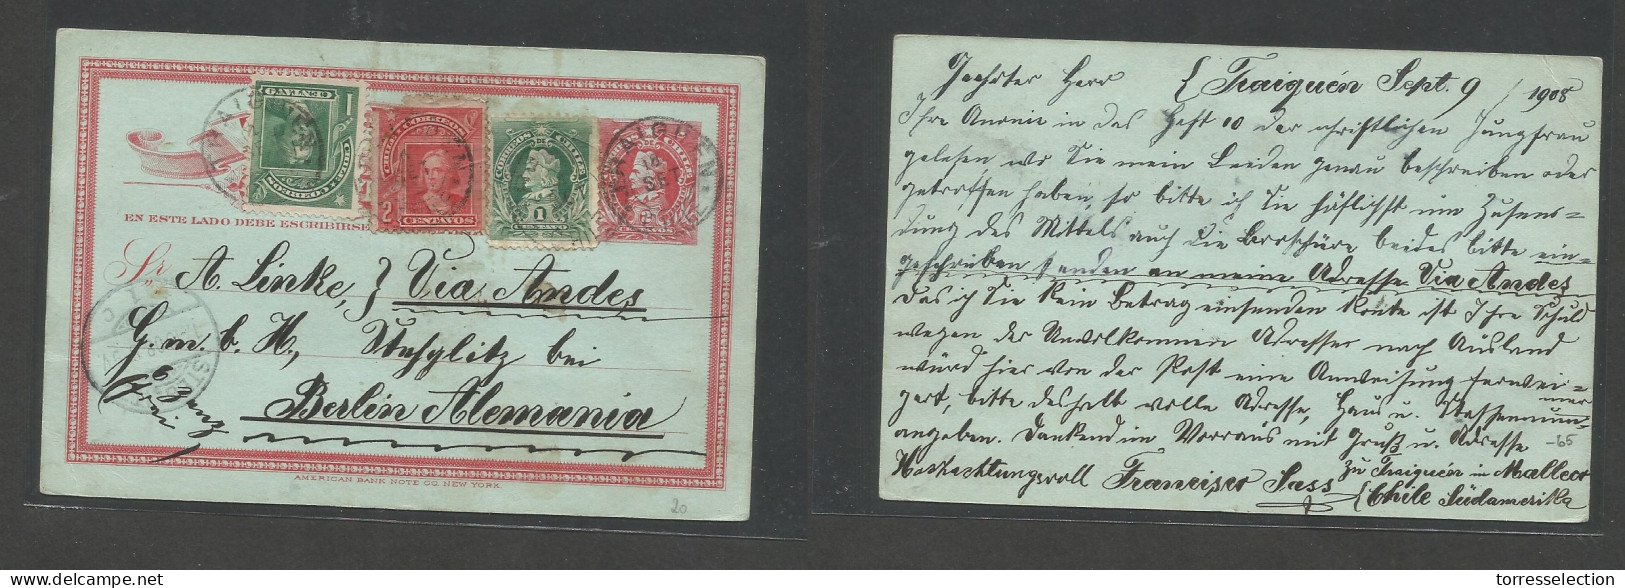 CHILE - Stationery. 1908 (9 Sept) Traiguen - Germany, Berlin (14 Oct) 2c Red Colon Stat Card + 3 Adtls, At 6c Rate, Maes - Cile